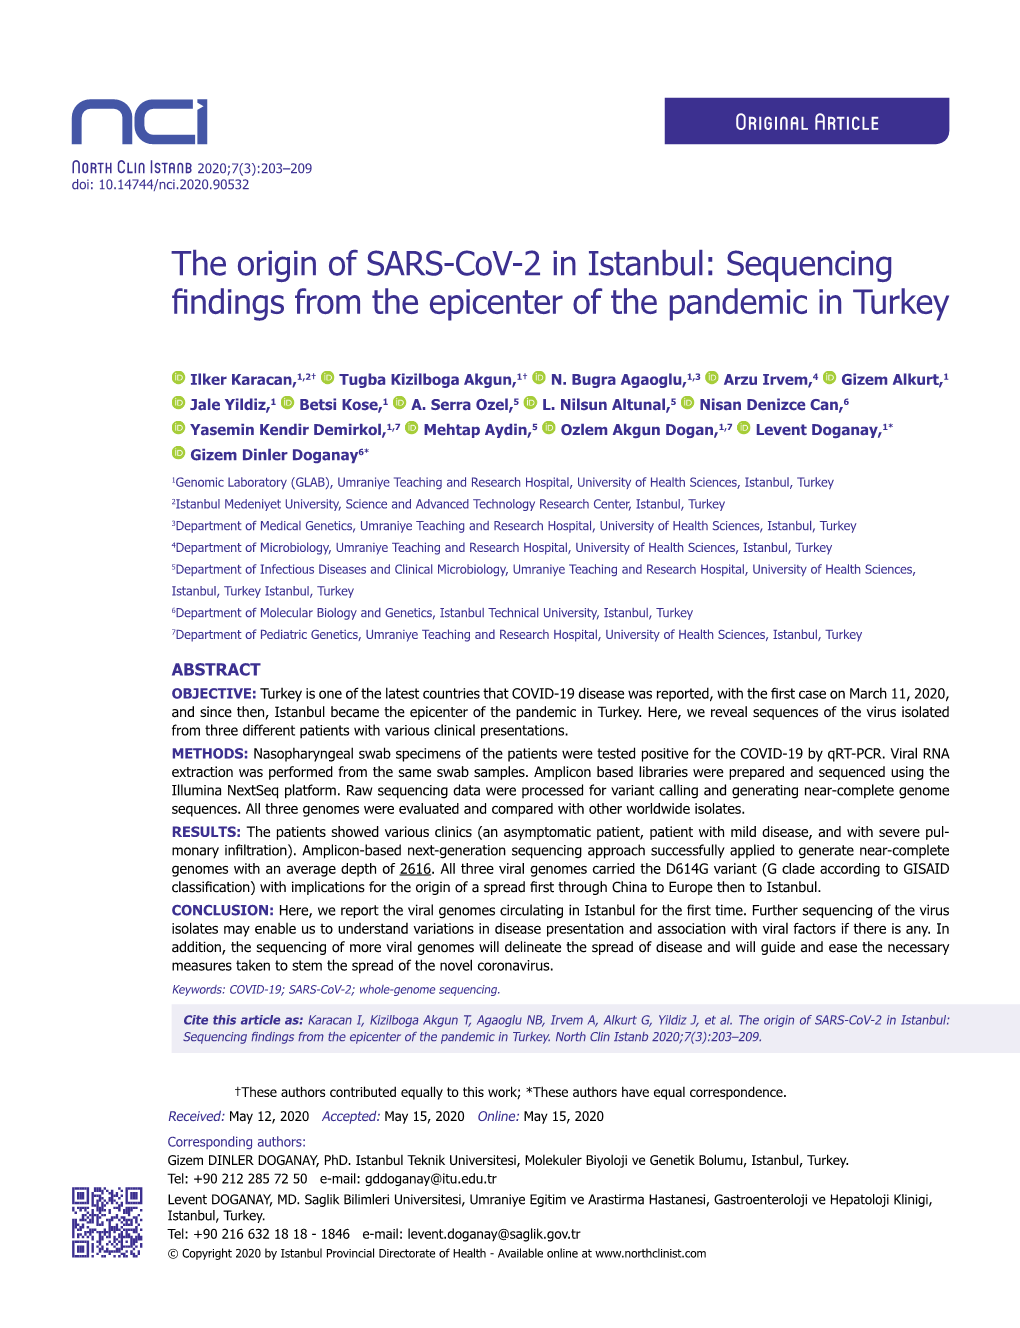 The Origin of SARS-Cov-2 in Istanbul: Sequencing Findings from the Epicenter of the Pandemic in Turkey